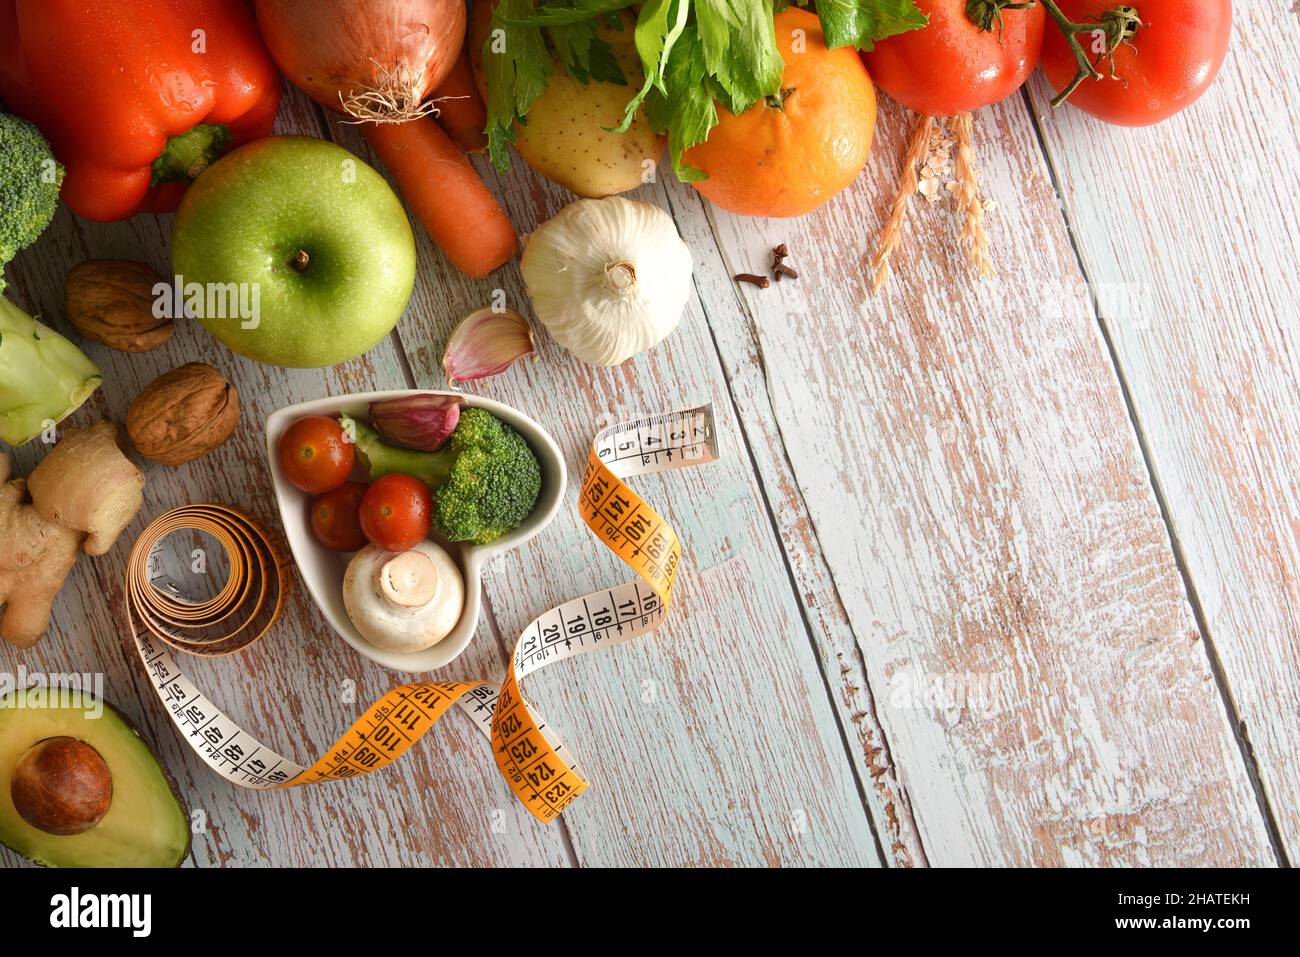 Balanced menu concept with fruits and vegetables on wooden table and heart-shaped bowl and measuring tape. Top view. Horizontal composition. Stock Photo